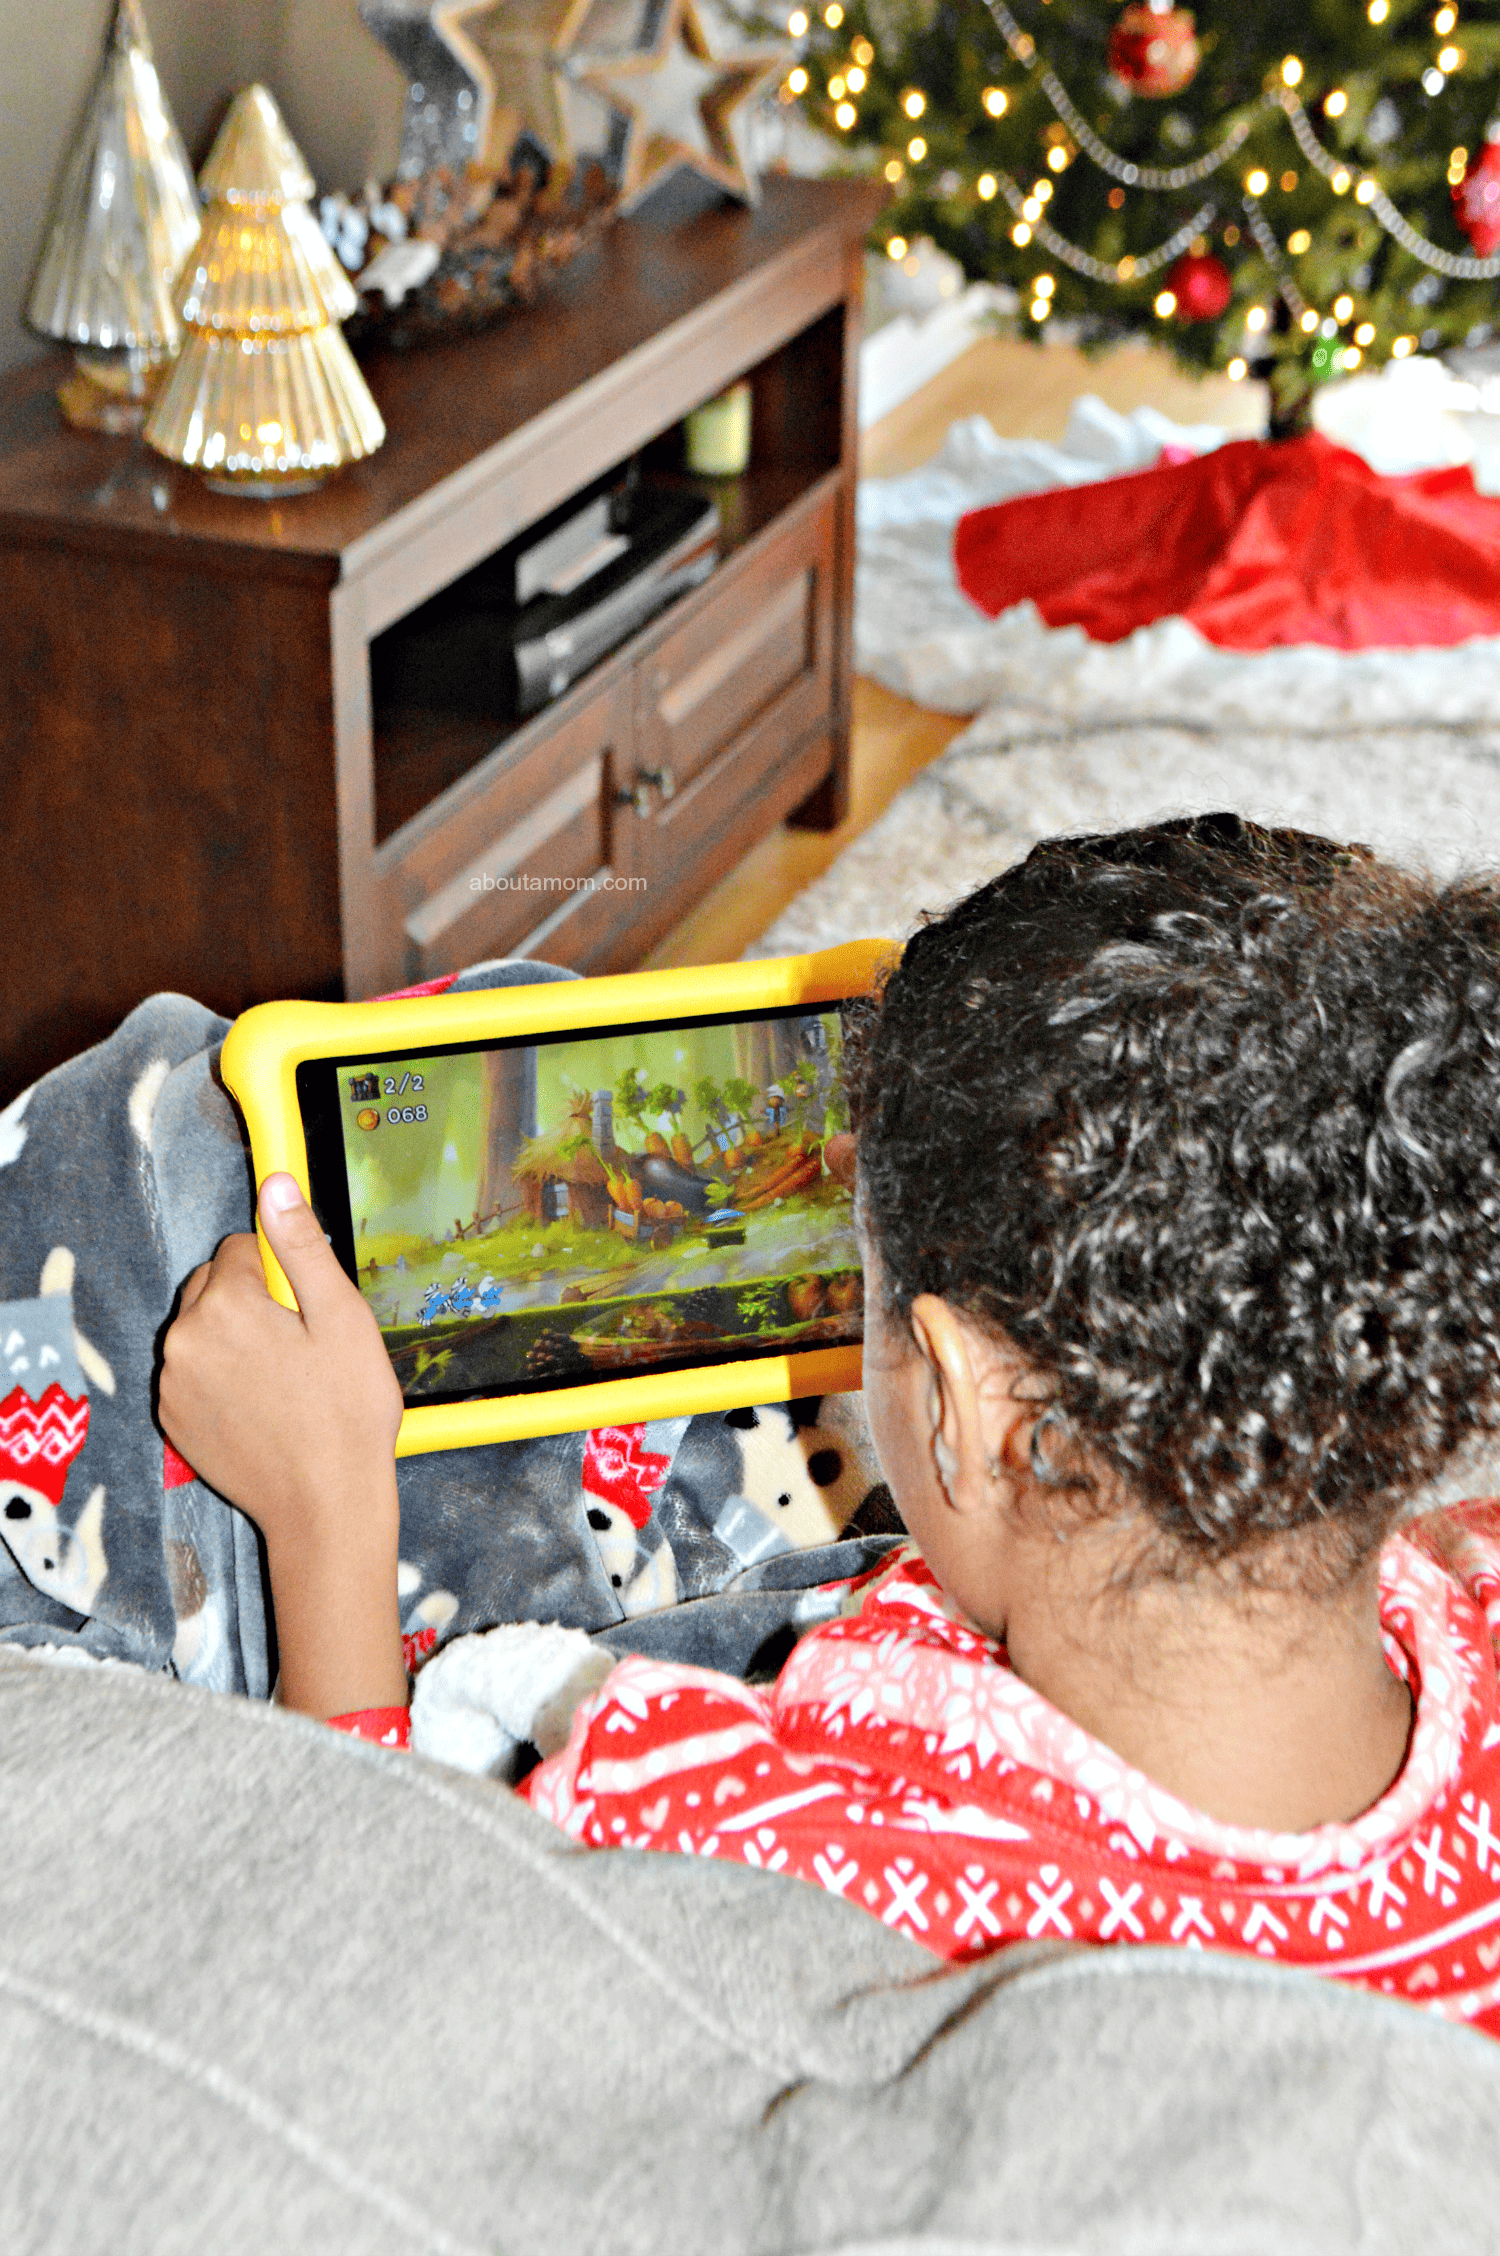 Have a jolly good holiday with the Amazon Fire HD 8 Kids Edition tablets. Amazon Fire Kids tablets come with a two-year worry-free guarantee and one-year subscription of Amazon FreeTime which includes unlimited access to over 15,000 books, videos, educational apps, and games. Enjoy all your favorite content - even while offline.